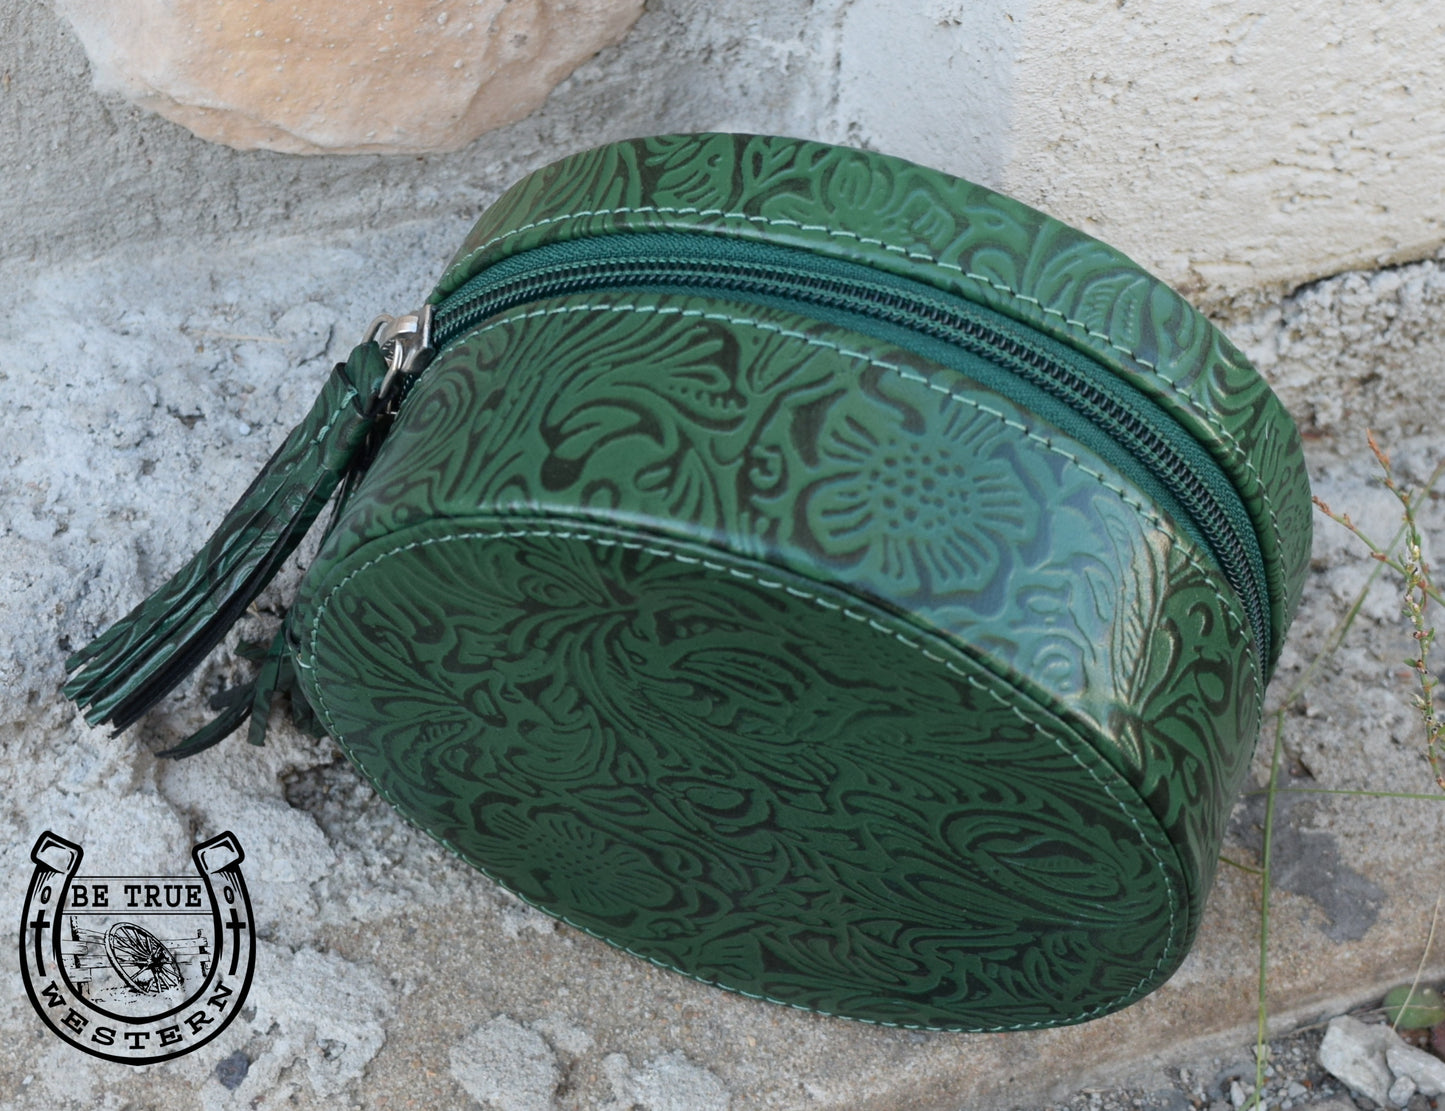 The Green Leather Jewelry Case